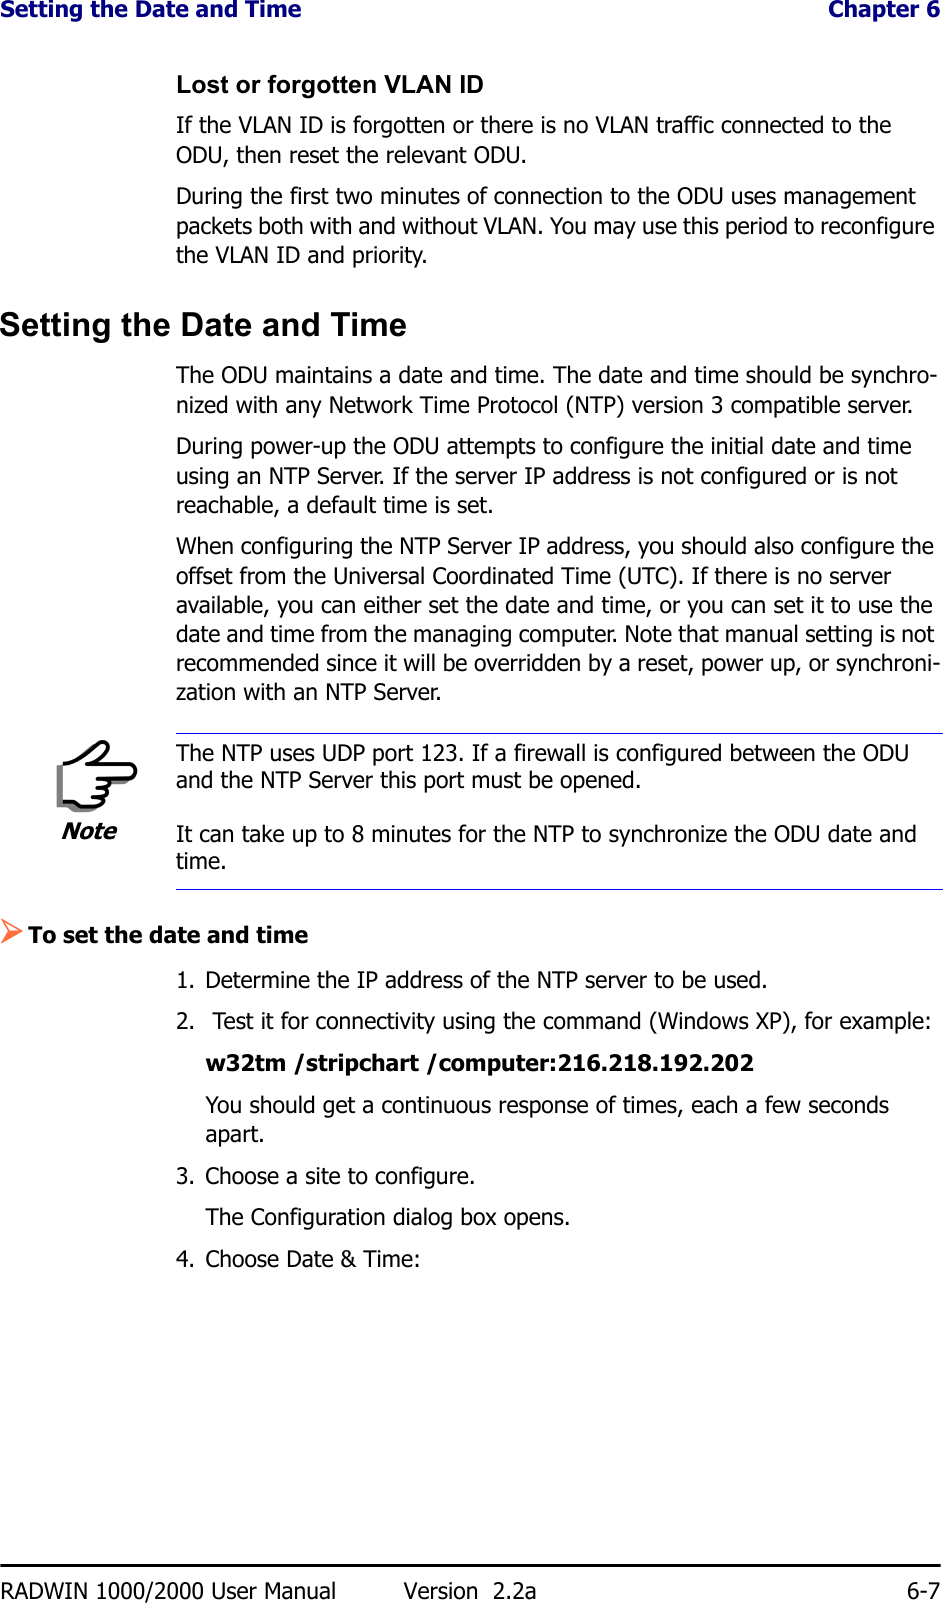 Setting the Date and Time  Chapter 6RADWIN 1000/2000 User Manual Version  2.2a 6-7Lost or forgotten VLAN IDIf the VLAN ID is forgotten or there is no VLAN traffic connected to the ODU, then reset the relevant ODU.During the first two minutes of connection to the ODU uses management packets both with and without VLAN. You may use this period to reconfigure the VLAN ID and priority.Setting the Date and TimeThe ODU maintains a date and time. The date and time should be synchro-nized with any Network Time Protocol (NTP) version 3 compatible server.During power-up the ODU attempts to configure the initial date and time using an NTP Server. If the server IP address is not configured or is not reachable, a default time is set.When configuring the NTP Server IP address, you should also configure the offset from the Universal Coordinated Time (UTC). If there is no server available, you can either set the date and time, or you can set it to use the date and time from the managing computer. Note that manual setting is not recommended since it will be overridden by a reset, power up, or synchroni-zation with an NTP Server.¾To set the date and time1. Determine the IP address of the NTP server to be used.2.  Test it for connectivity using the command (Windows XP), for example:w32tm /stripchart /computer:216.218.192.202You should get a continuous response of times, each a few seconds apart.3. Choose a site to configure.The Configuration dialog box opens.4. Choose Date &amp; Time:NoteThe NTP uses UDP port 123. If a firewall is configured between the ODU and the NTP Server this port must be opened.It can take up to 8 minutes for the NTP to synchronize the ODU date and time.